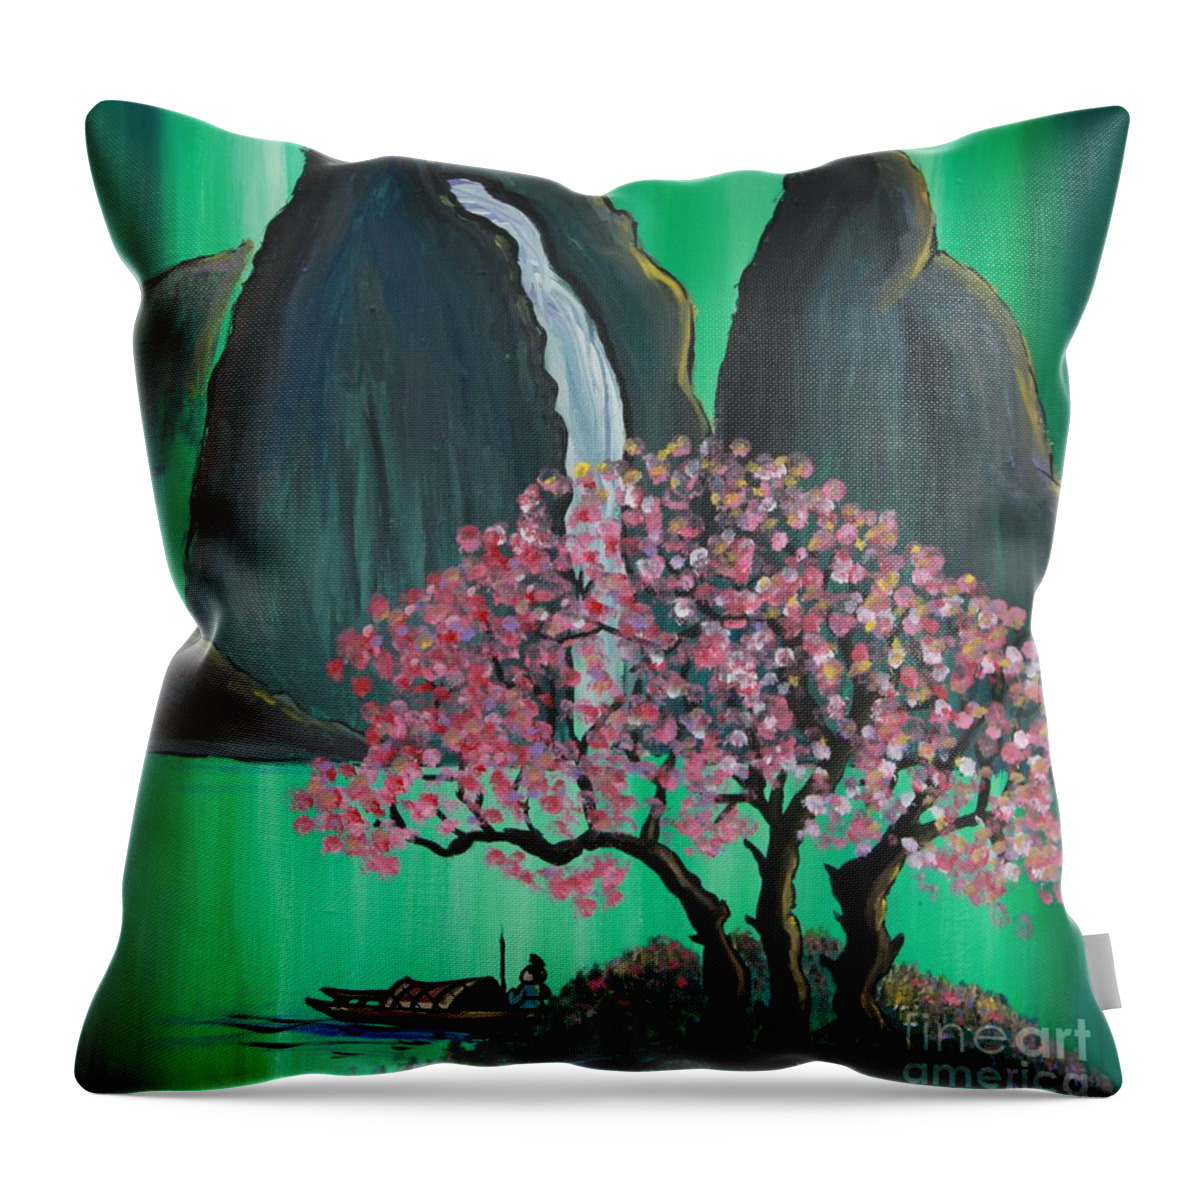 Japan Throw Pillow featuring the painting Fantasy Japan by Jacqueline Athmann